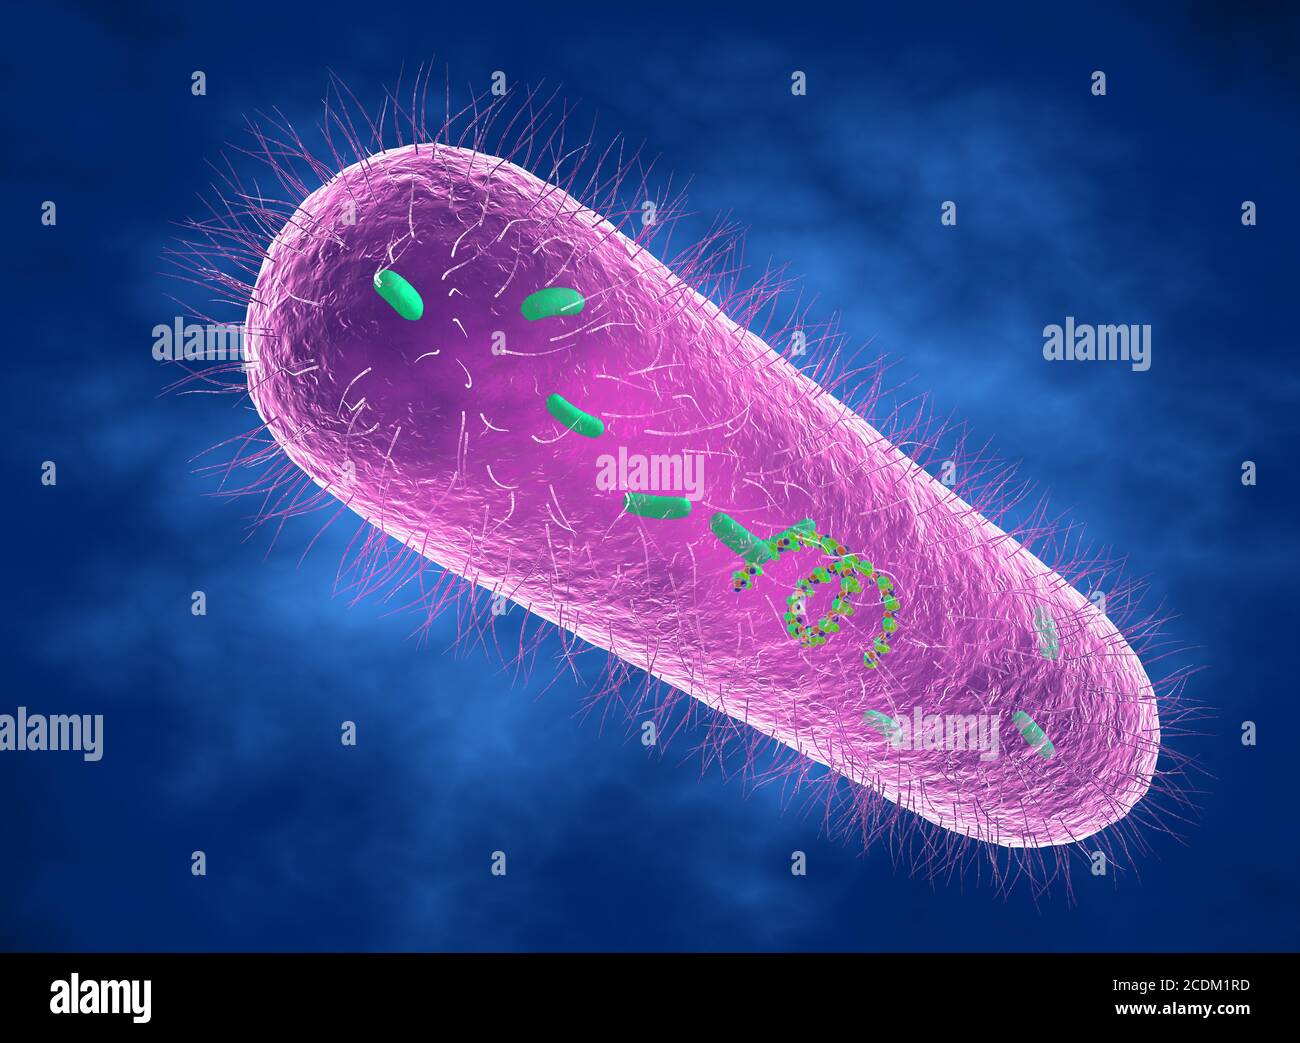 3d illustration of a Pseudomonas aeruginosa bacterium showing internal structure. These Gram-negative rod-shaped bacteria are found in soil, water and as normal flora in the human intestine. They can cause serious wound, lung, skin and urinary tract infections, particularly in hospital patients. They produce extracellular polysaccharide (EPS), a sticky slime-like substance that enables them to grow in large masses (biofilms) and resist antibacterial agents such as antibiotics. Stock Photo